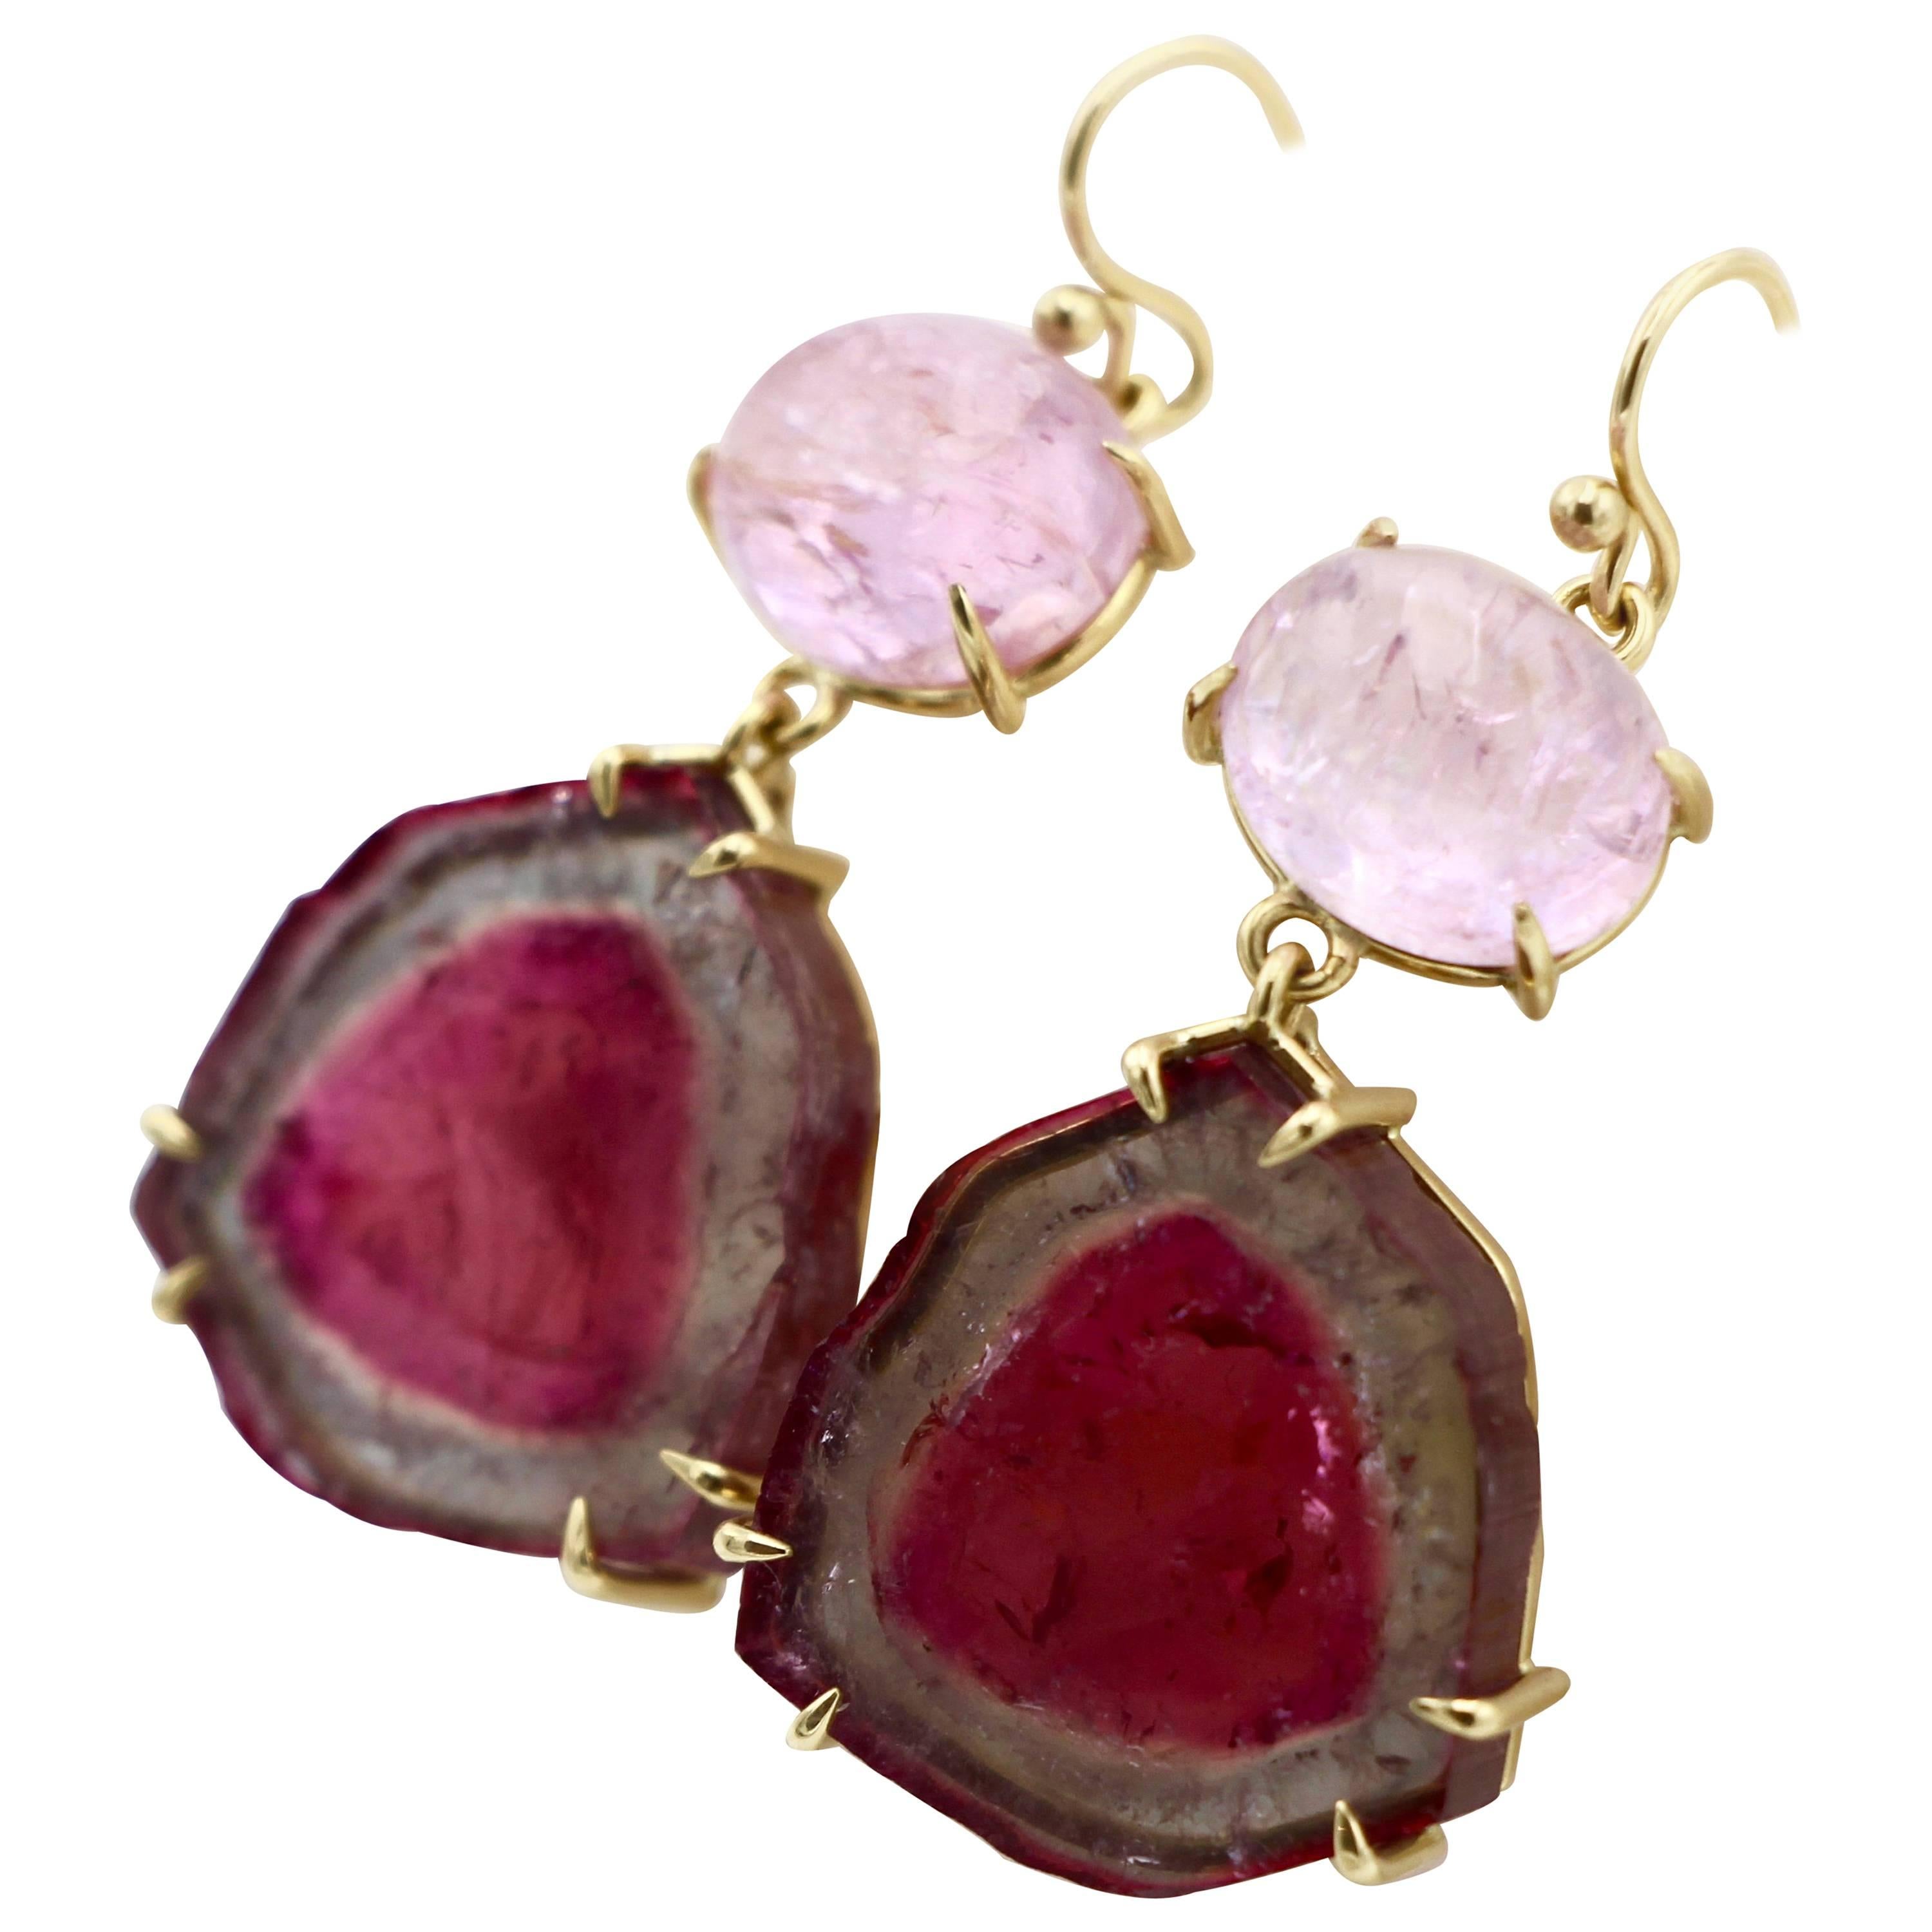 Pretty in Pink. Pink Topaz (16 Carat) enhances the deeper hue of the exquisite Watermelon Tourmaline, set in 18 Karat Gold, creating a truly unique pair of earrings.